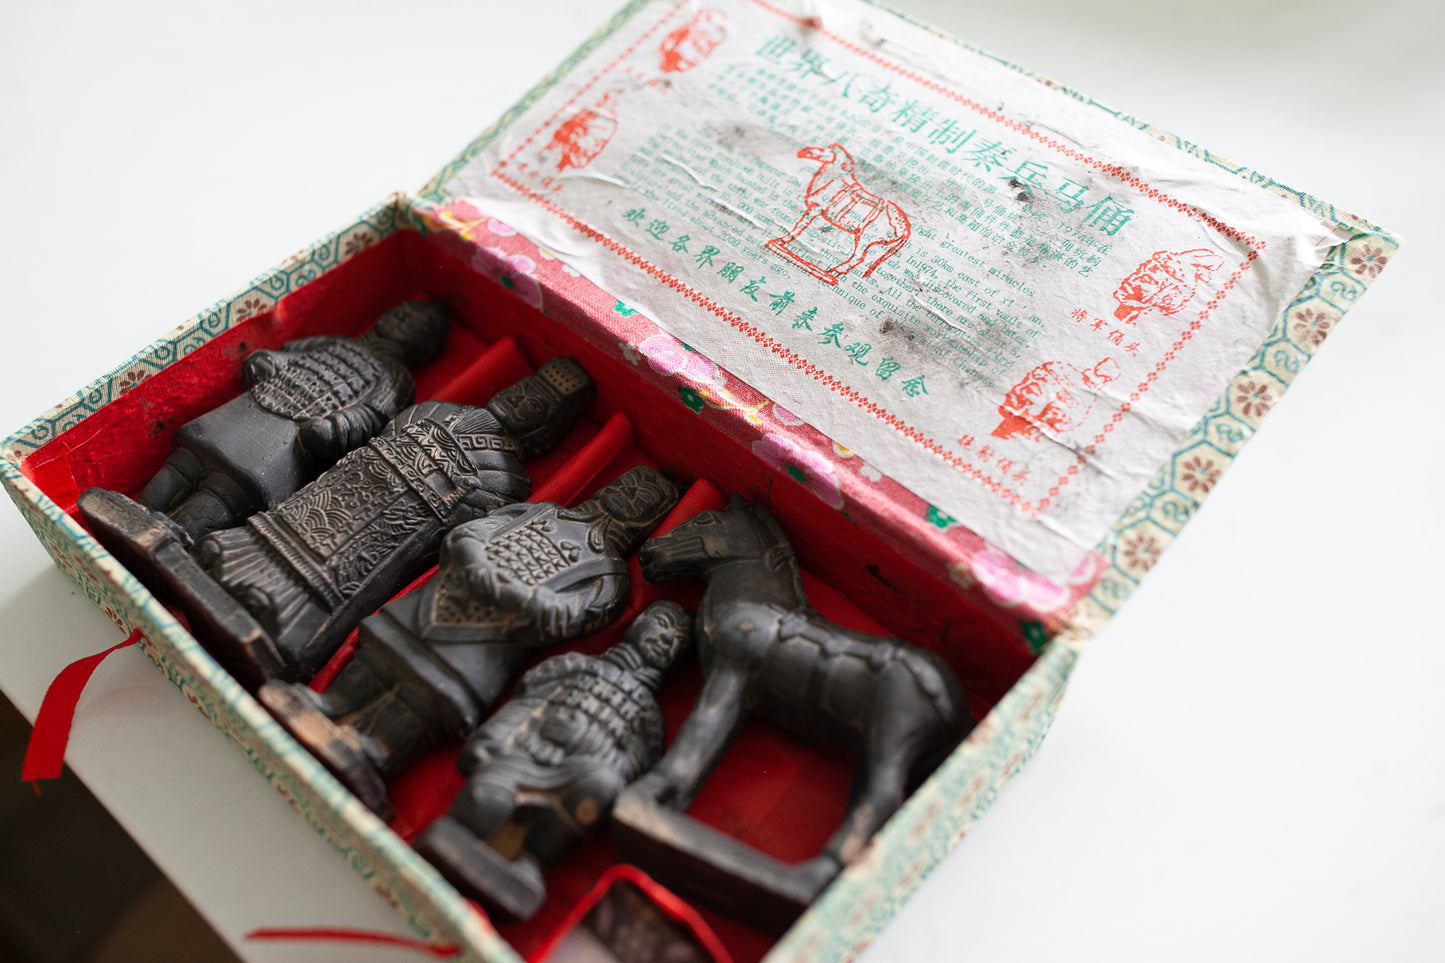 Vintage, boxed, five terracotta, chinese figurines of warriors and a horse, set tomb of Emperor Shi Qin Dynasty, terracotta army